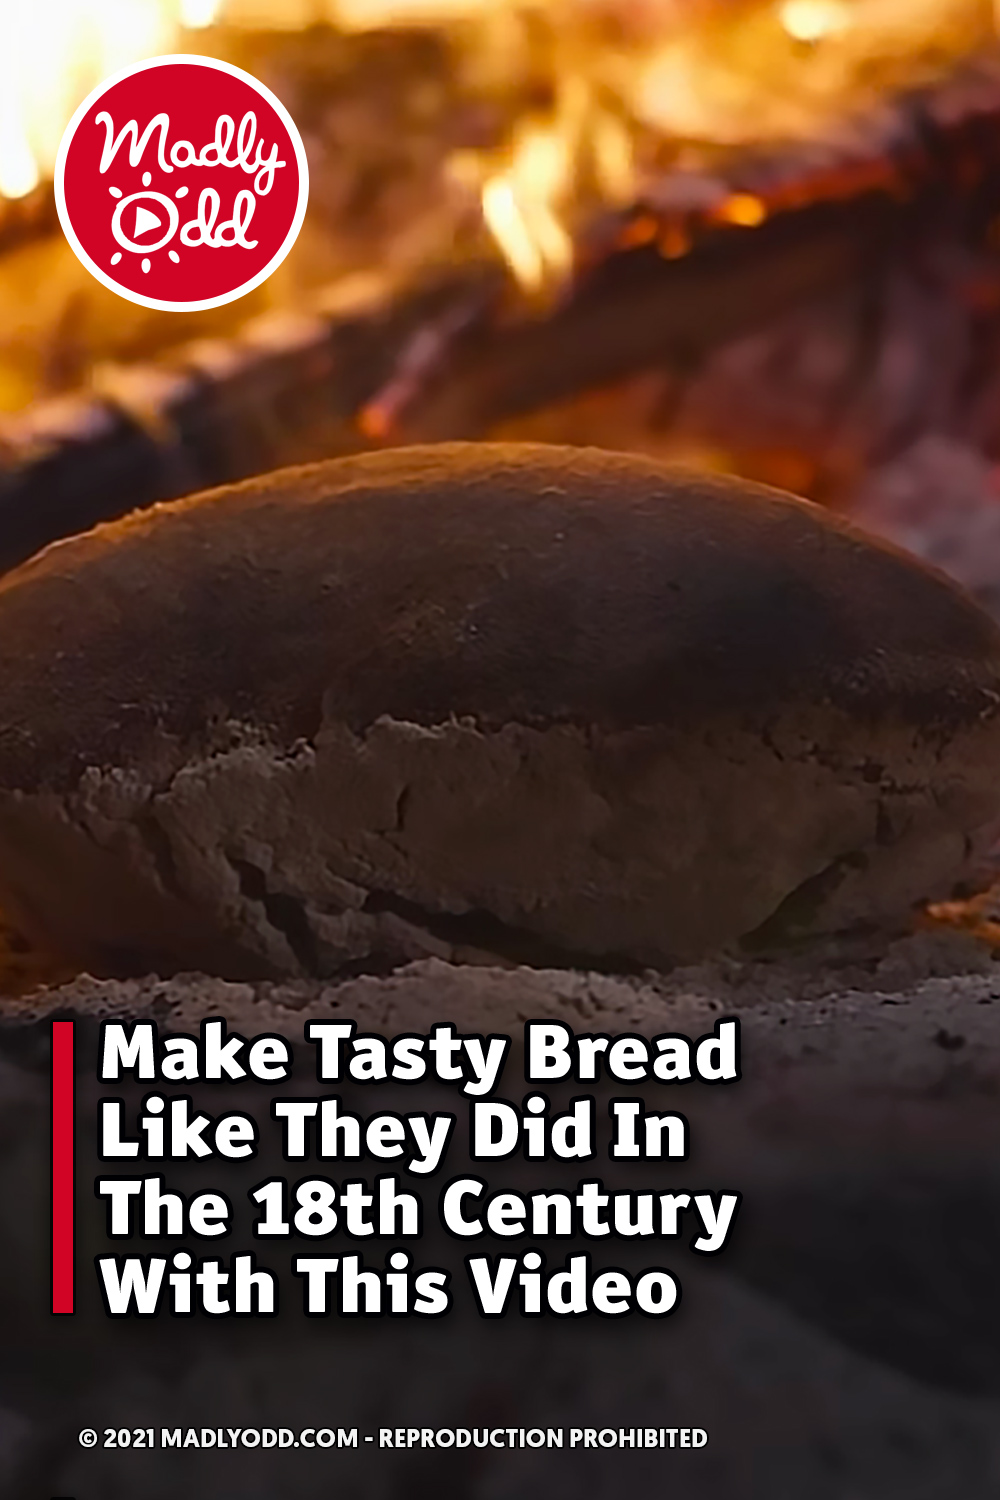 Make Tasty Bread Like They Did In The 18th Century With This Video